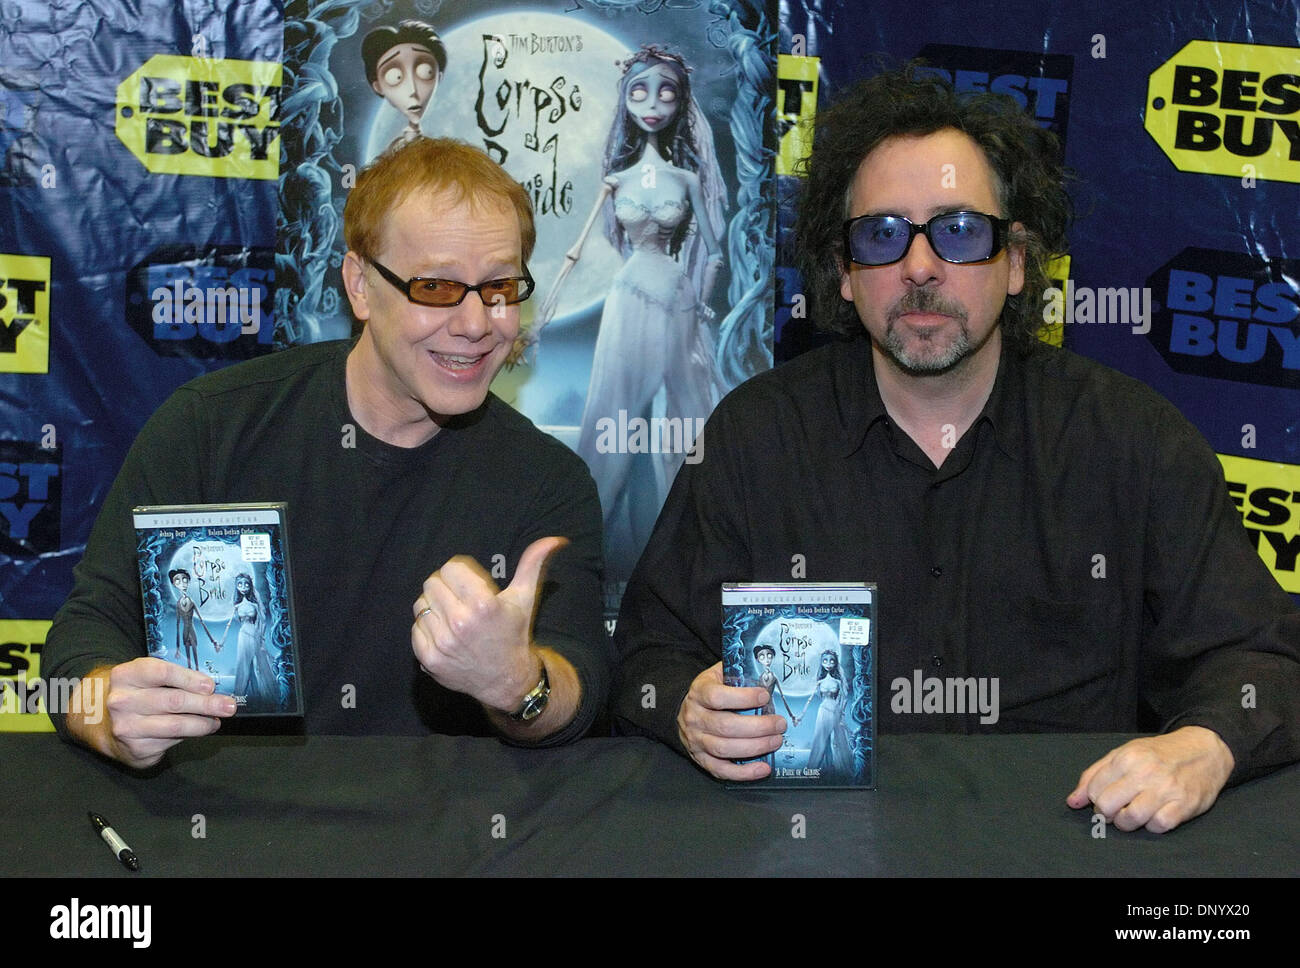 Feb 14, 2006; Hollywood, CA, USA; Composer DANNY ELFMAN and Director TIM  BURTON sign copies of their latest DVD 'The Corpse Bride' and meet their  fans. Mandatory Credit: Photo by Rob DeLorenzo/ZUMA